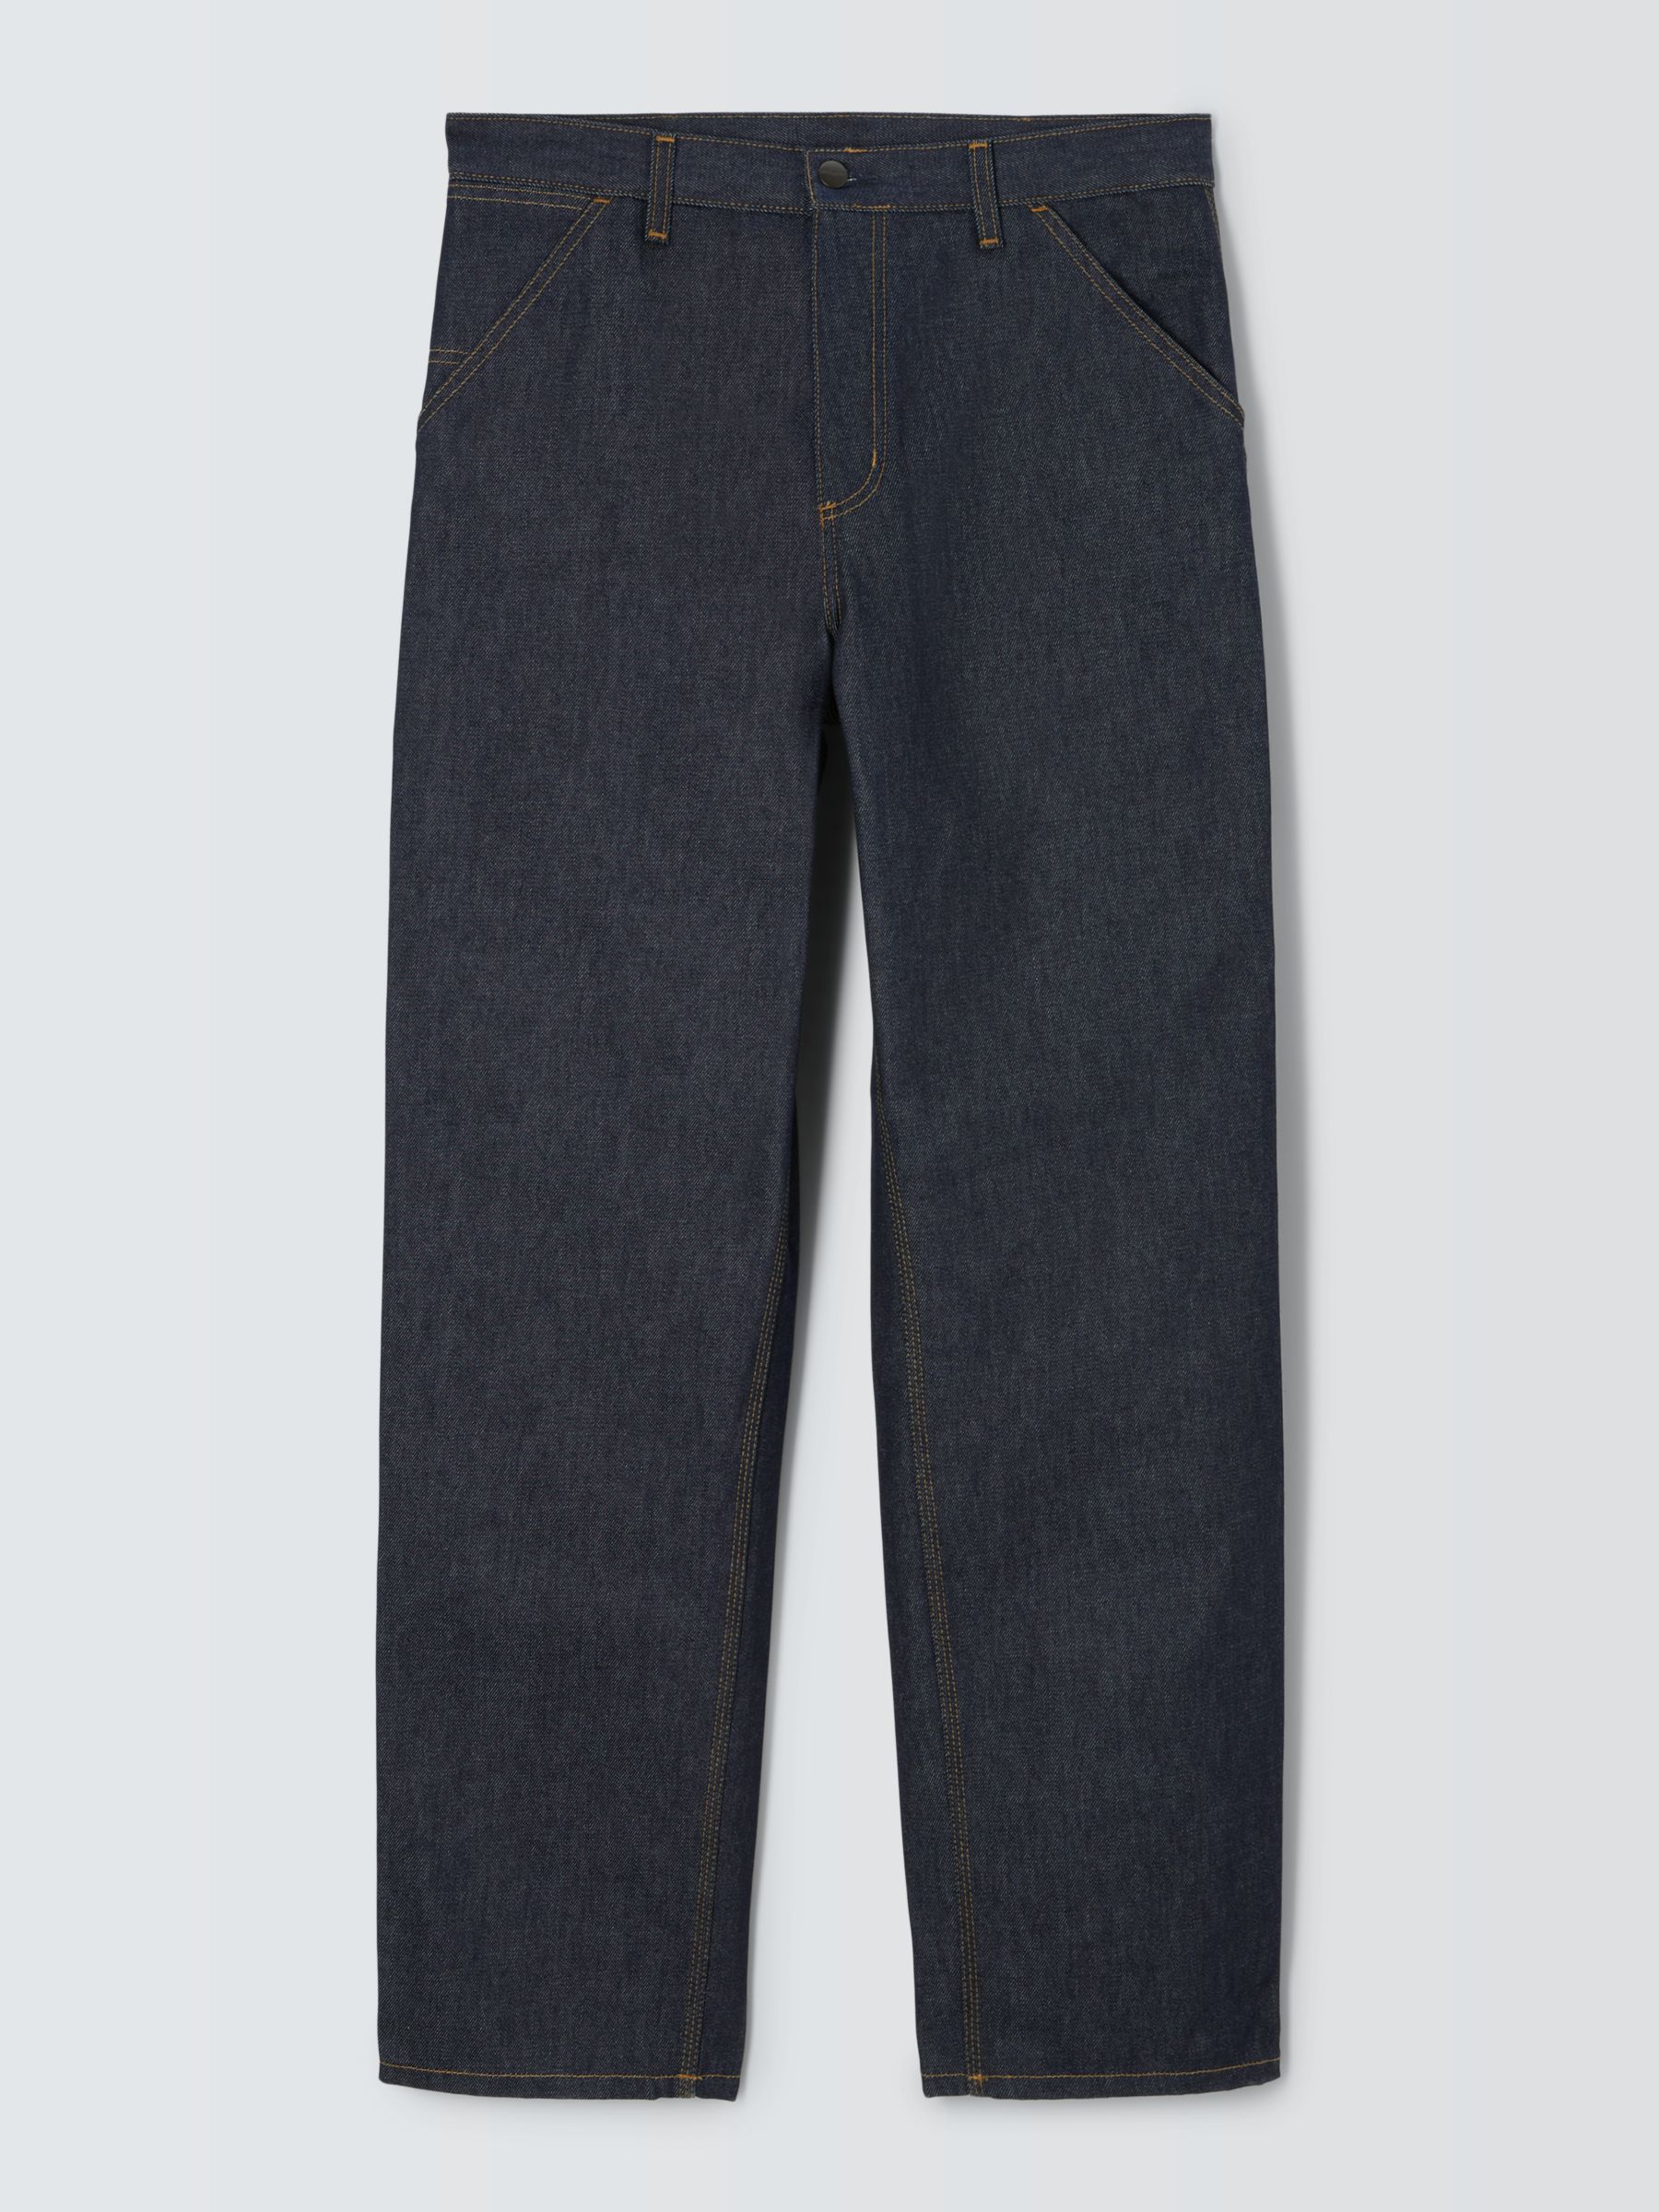 Carhartt WIP Relaxed Straight Fit Jeans, Blue at John Lewis & Partners